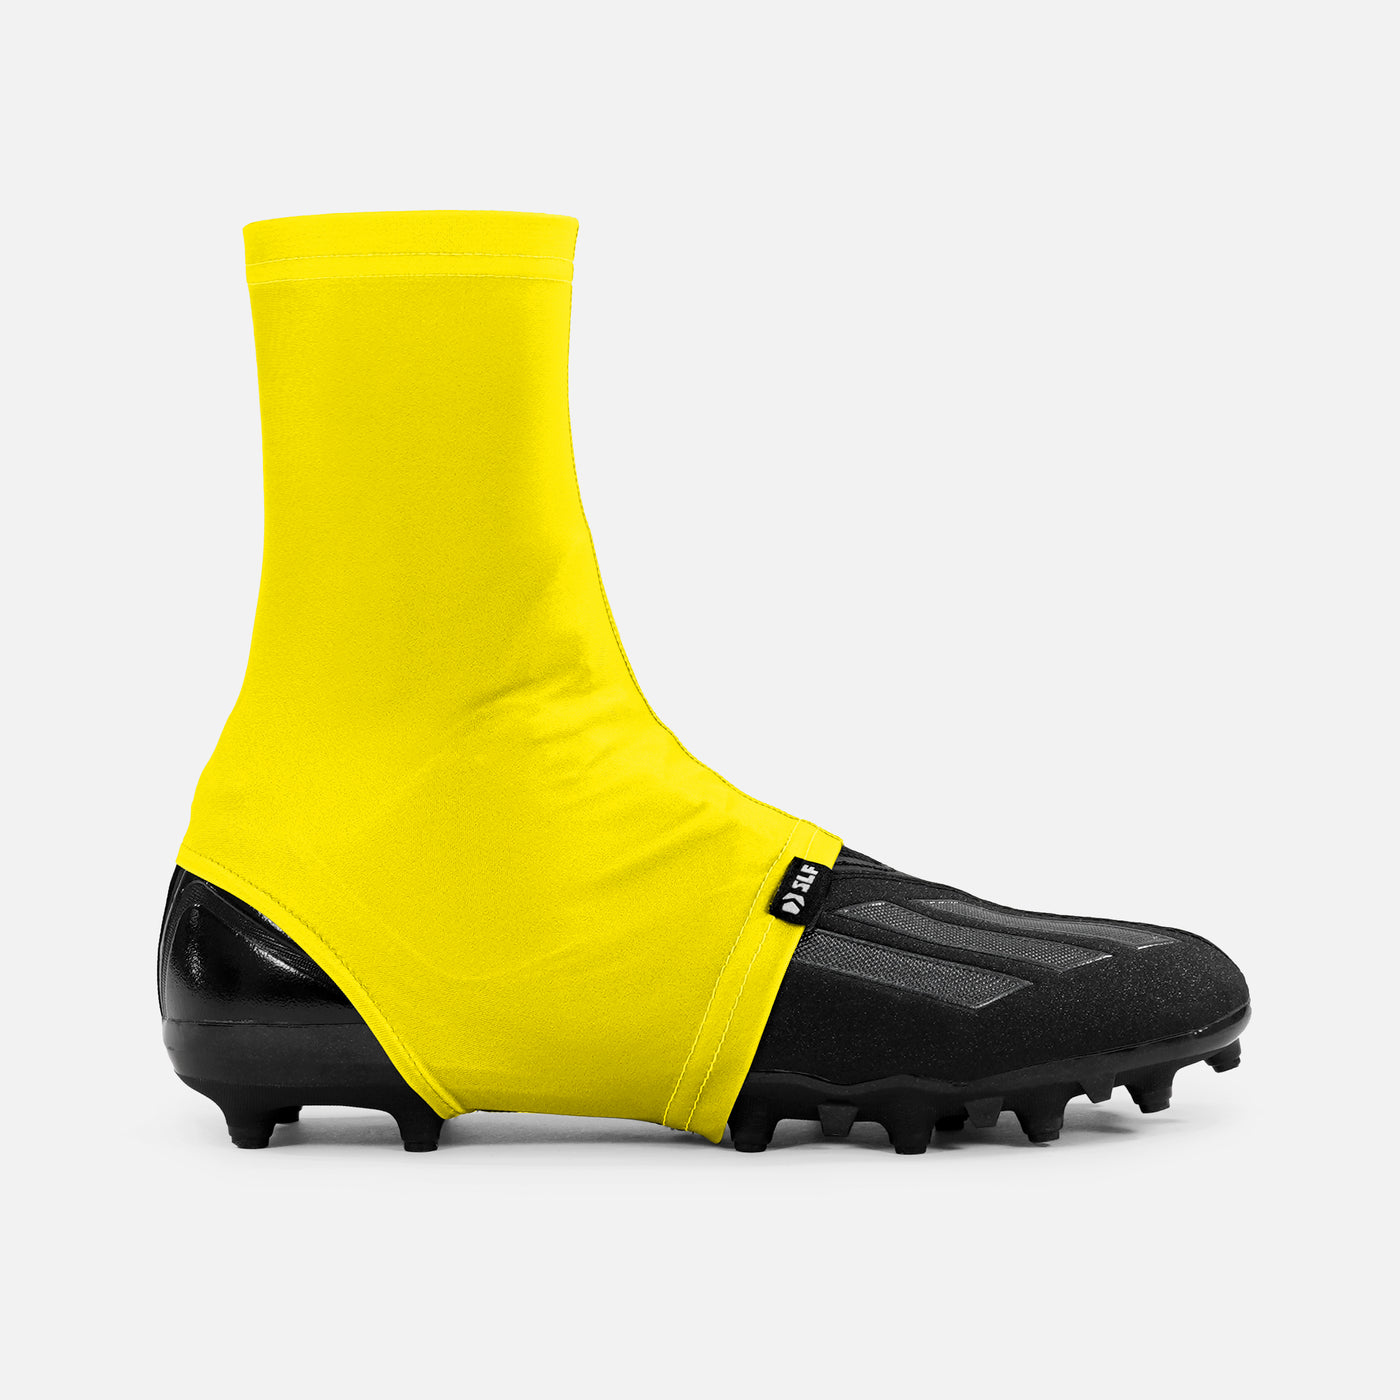 Hue Yellow Spats / Cleat Covers - Big